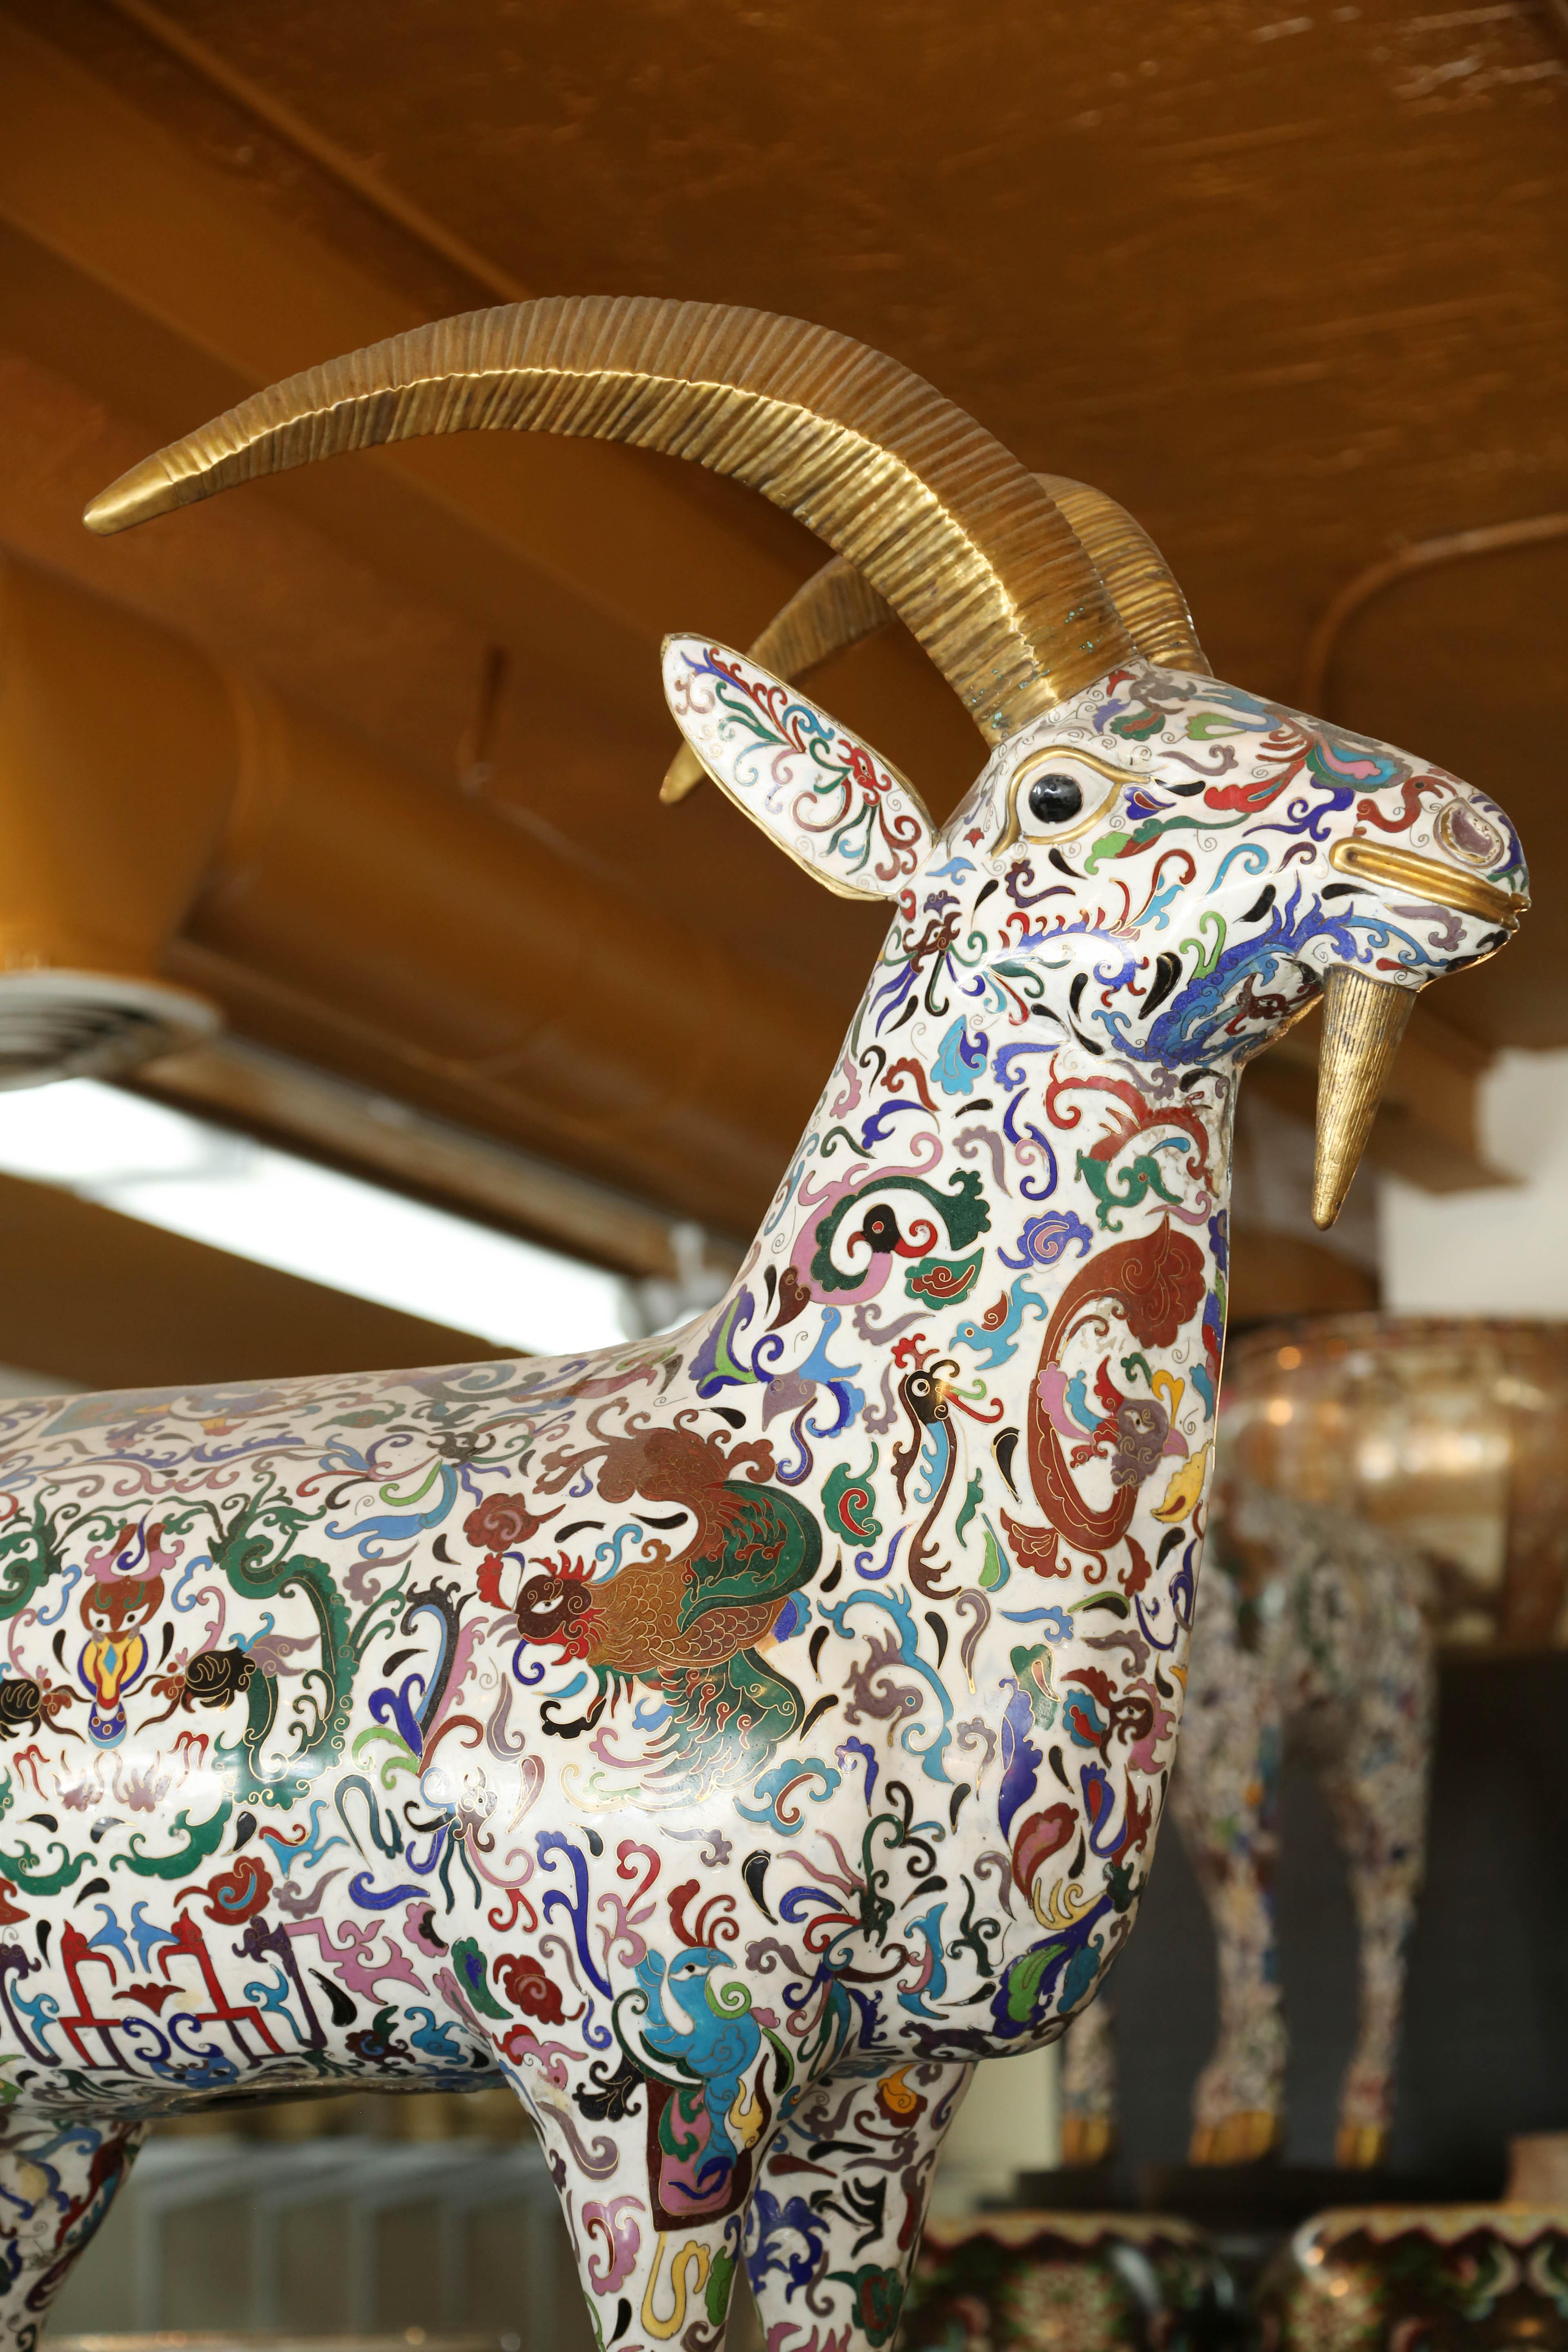 Rams are from an important Chinese collection on sale for the first time
over 100 years old, using the original cloisonne process, resulting in outstanding workmanship
according tradition they bring peace and luck